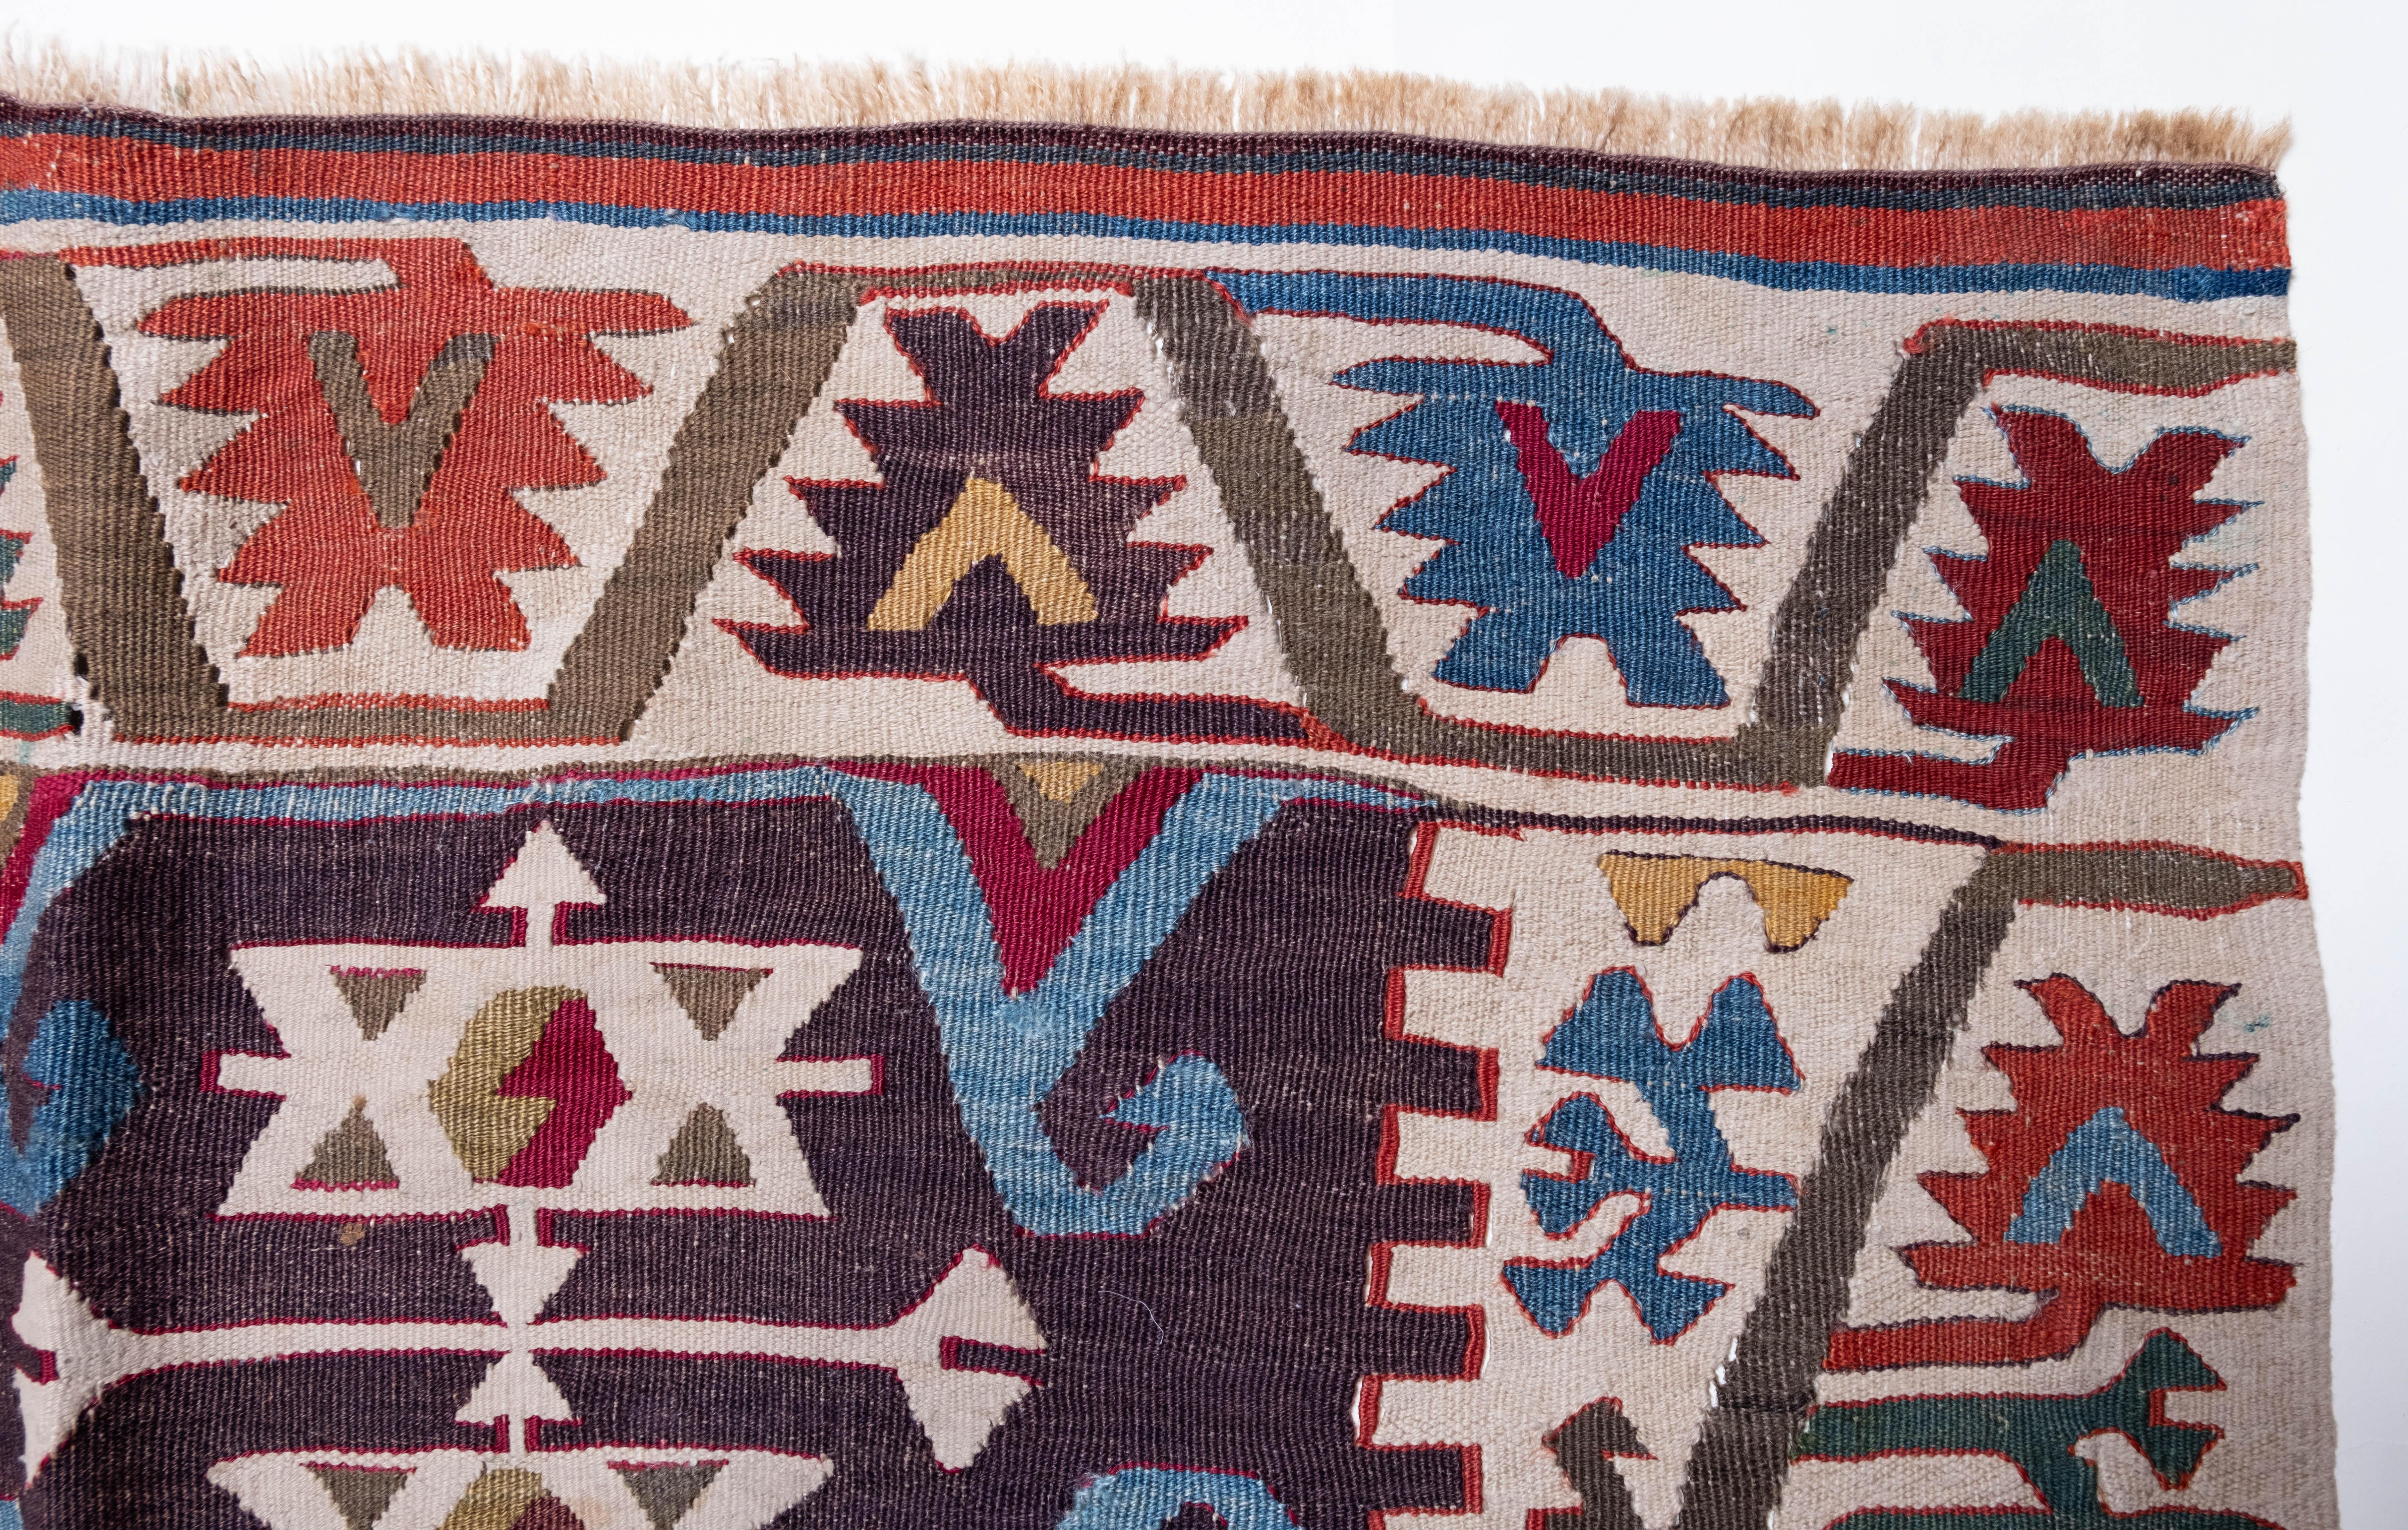 This is Central Anatolian Antique Kilim from the Aksaray region with a rare and beautiful color composition.

The beauty of the dyeing, the quality of the wool (thread), the splendor of the weave, and the age are all present in this old Anatolian